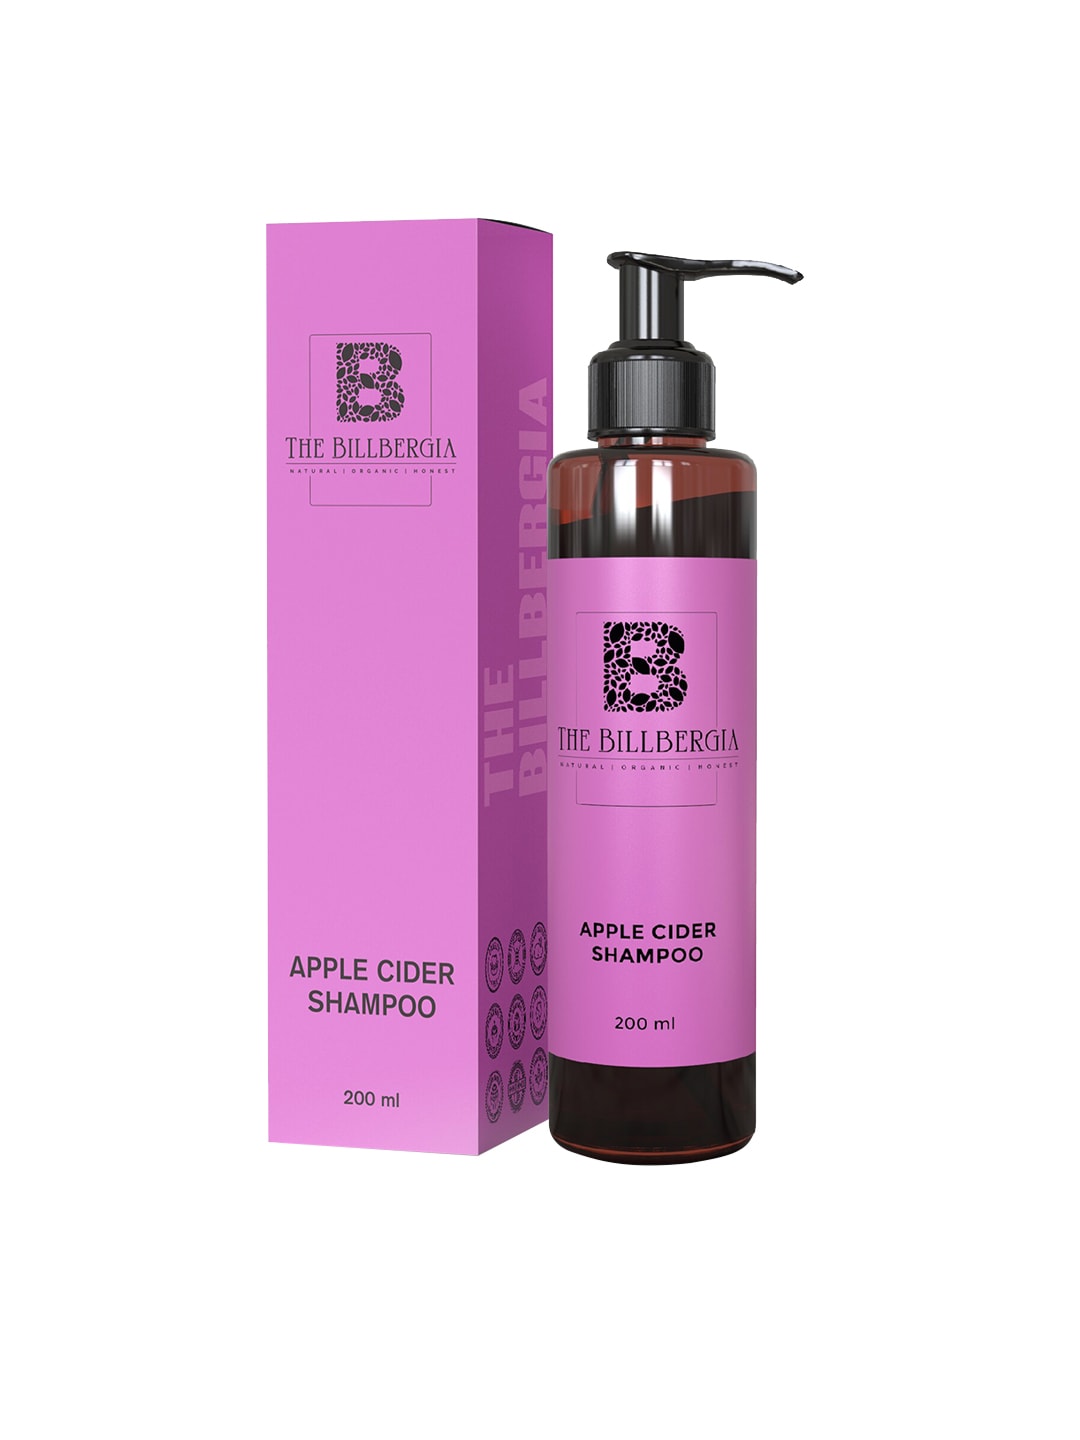 THE BILLBERGIA Apple Cider Shampoo with Almond Oil 200 ml Price in India